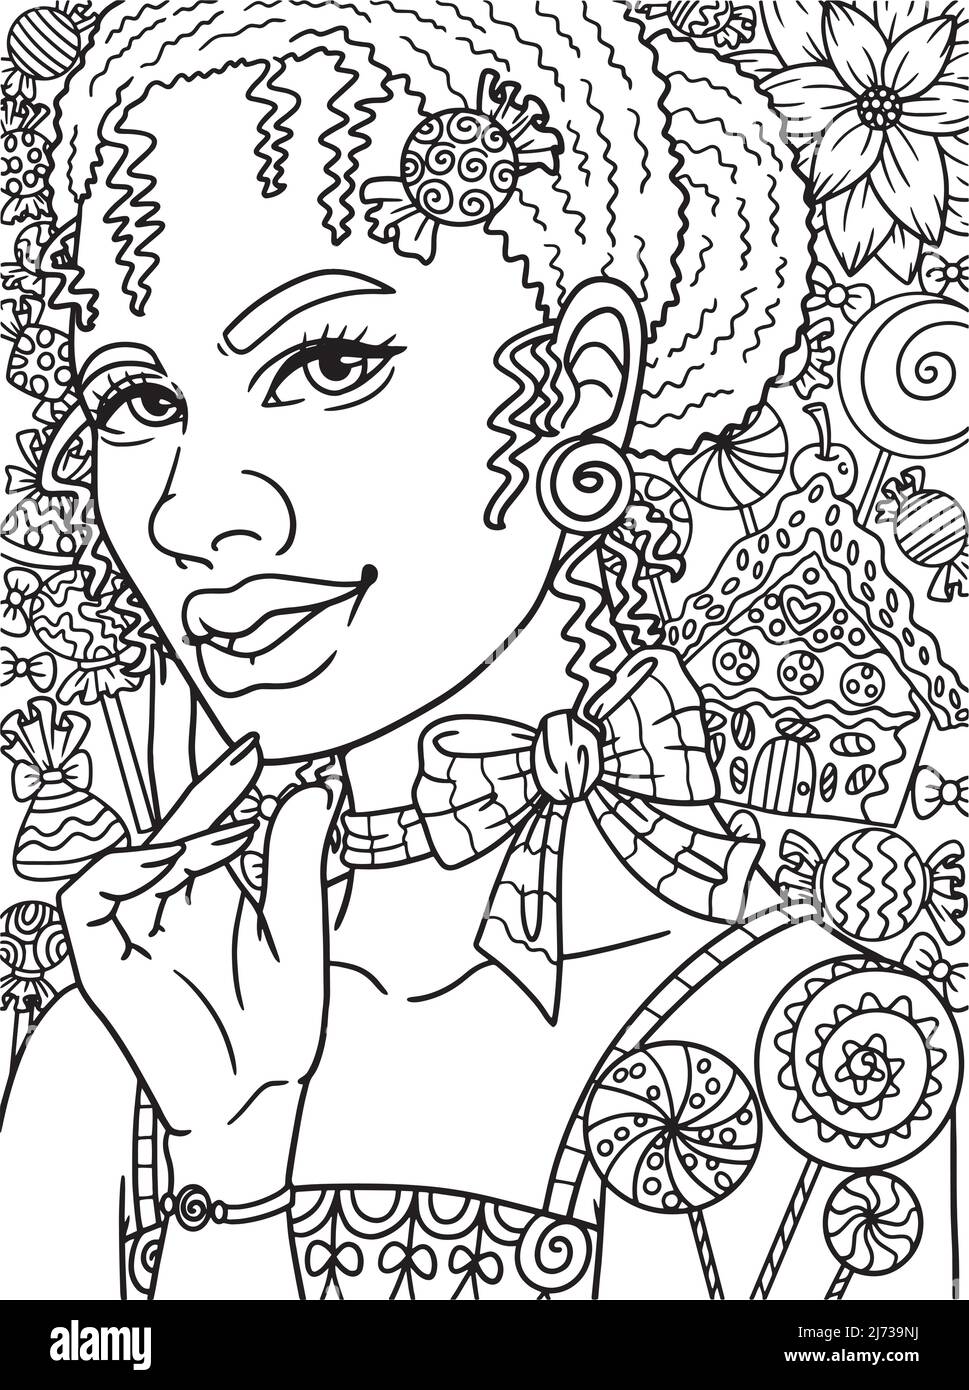 Afro American Woman Candy Adult Coloring Stock Vector